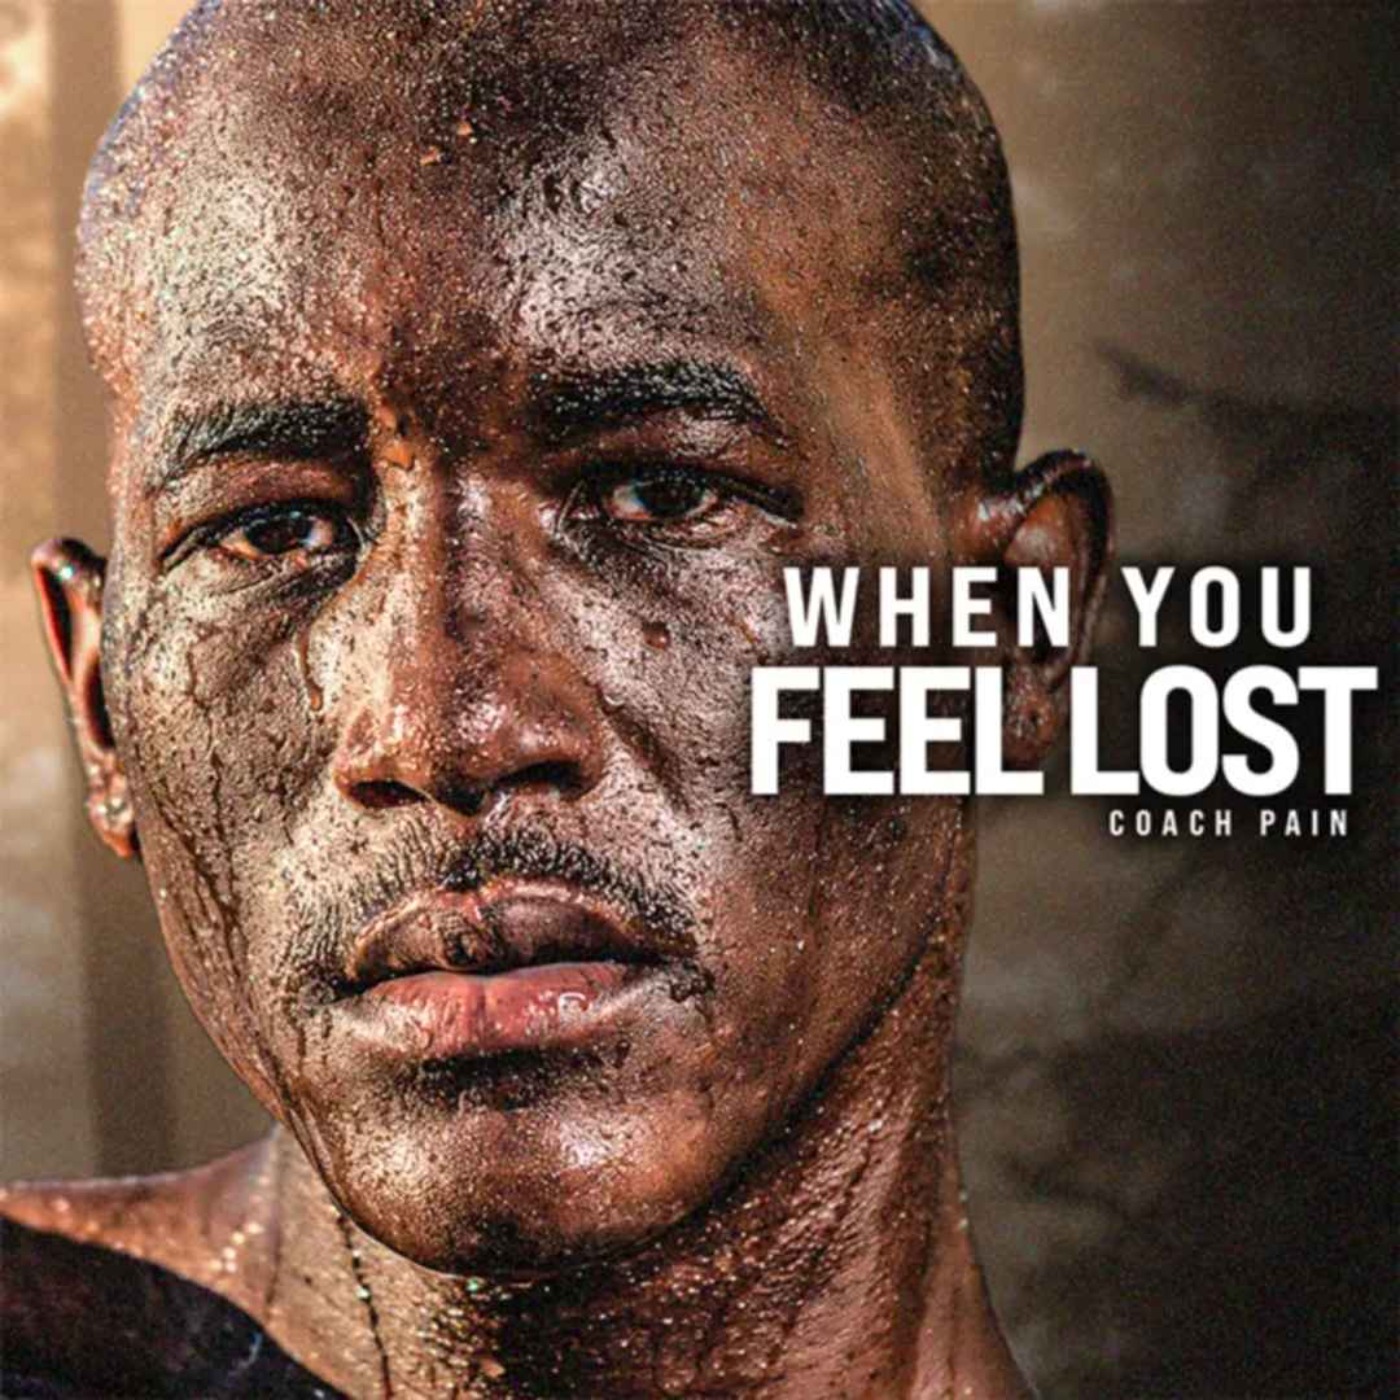 WHEN YOU FEEL LOST IN LIFE - Powerful Motivational Speech on NOT GIVING UP (Featuring Coach Pain)